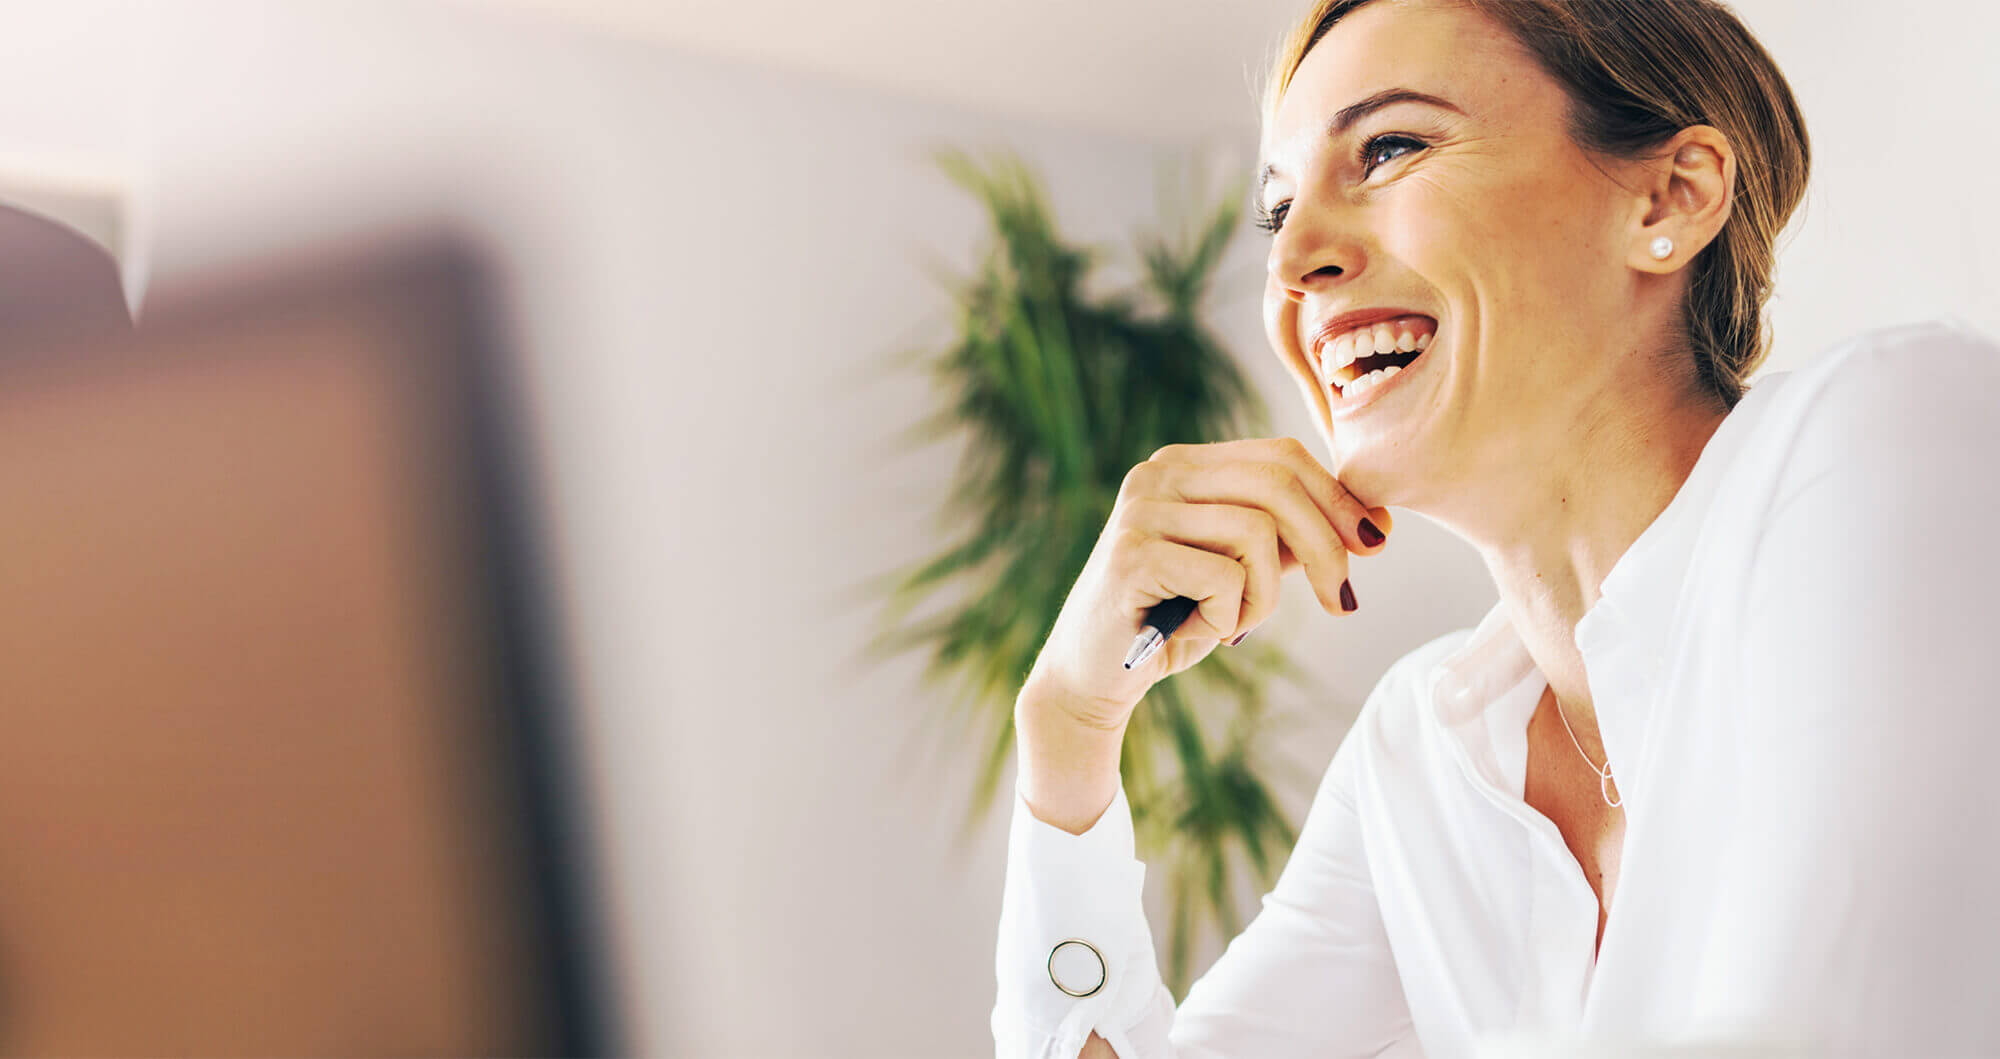 A financial services professional woman smiling